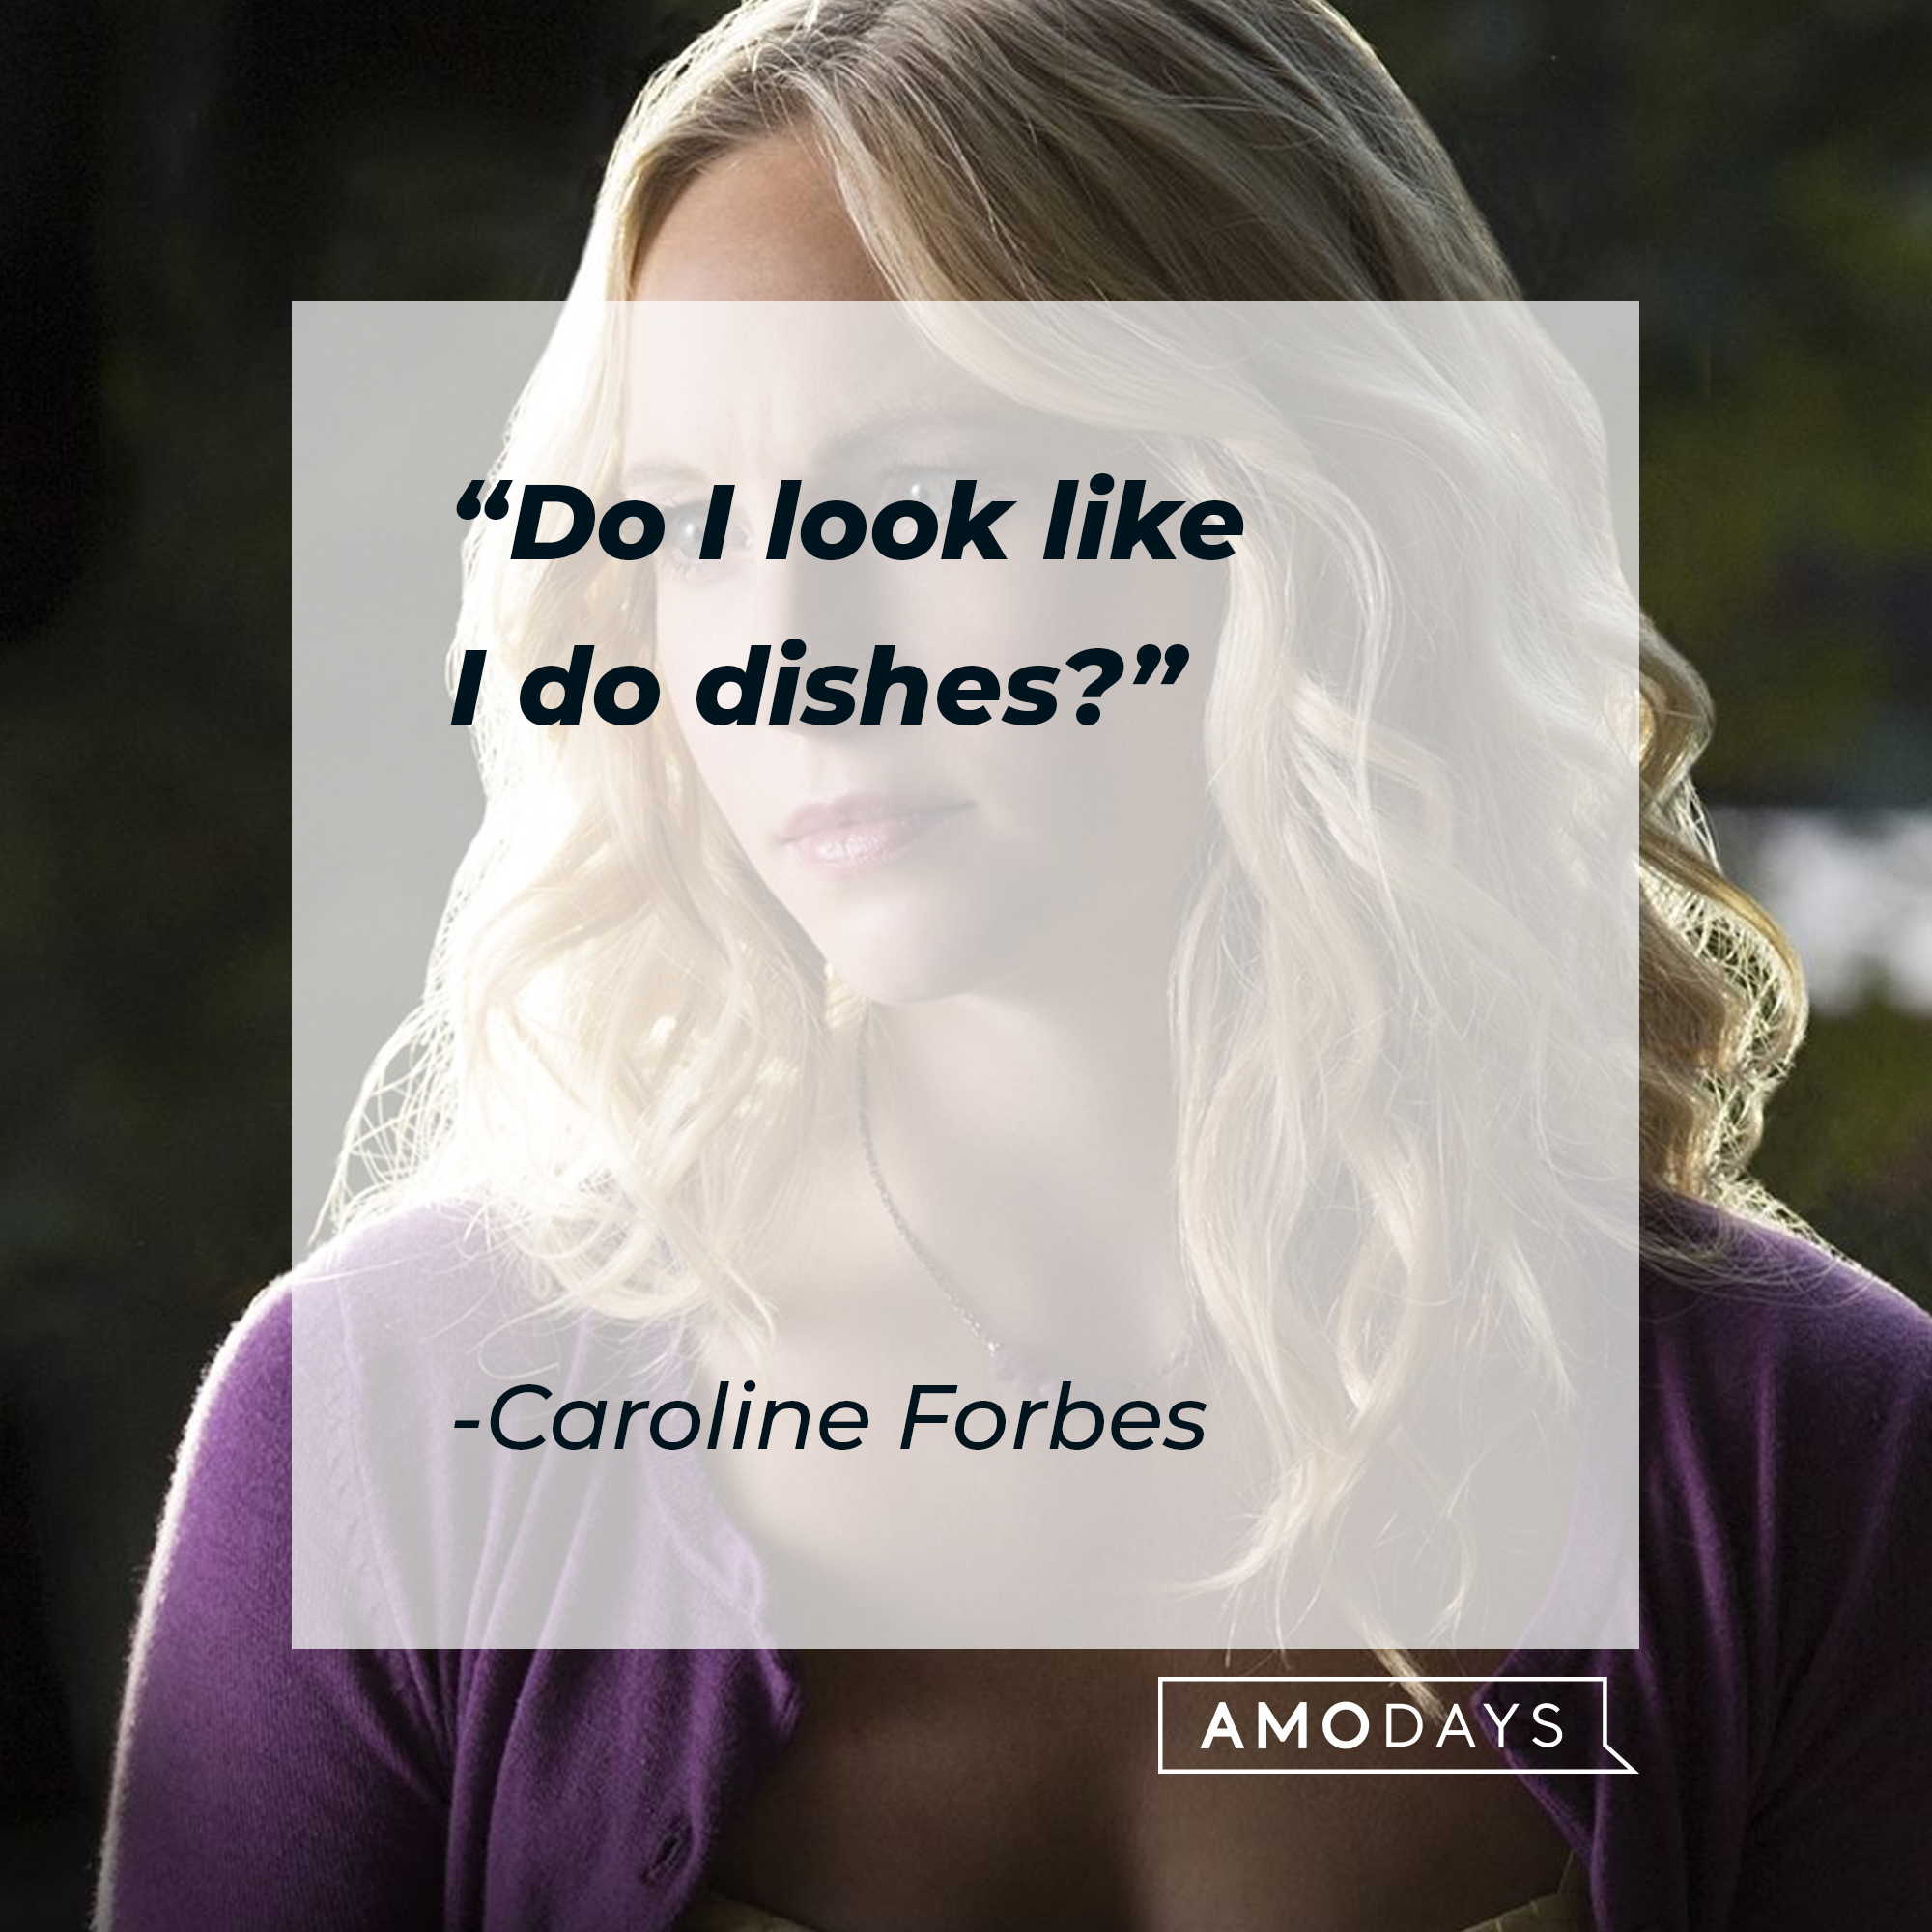 Caroline Forbes' quote: "Do I look like I do dishes?" | Source: Facebook.com/thevampirediaries